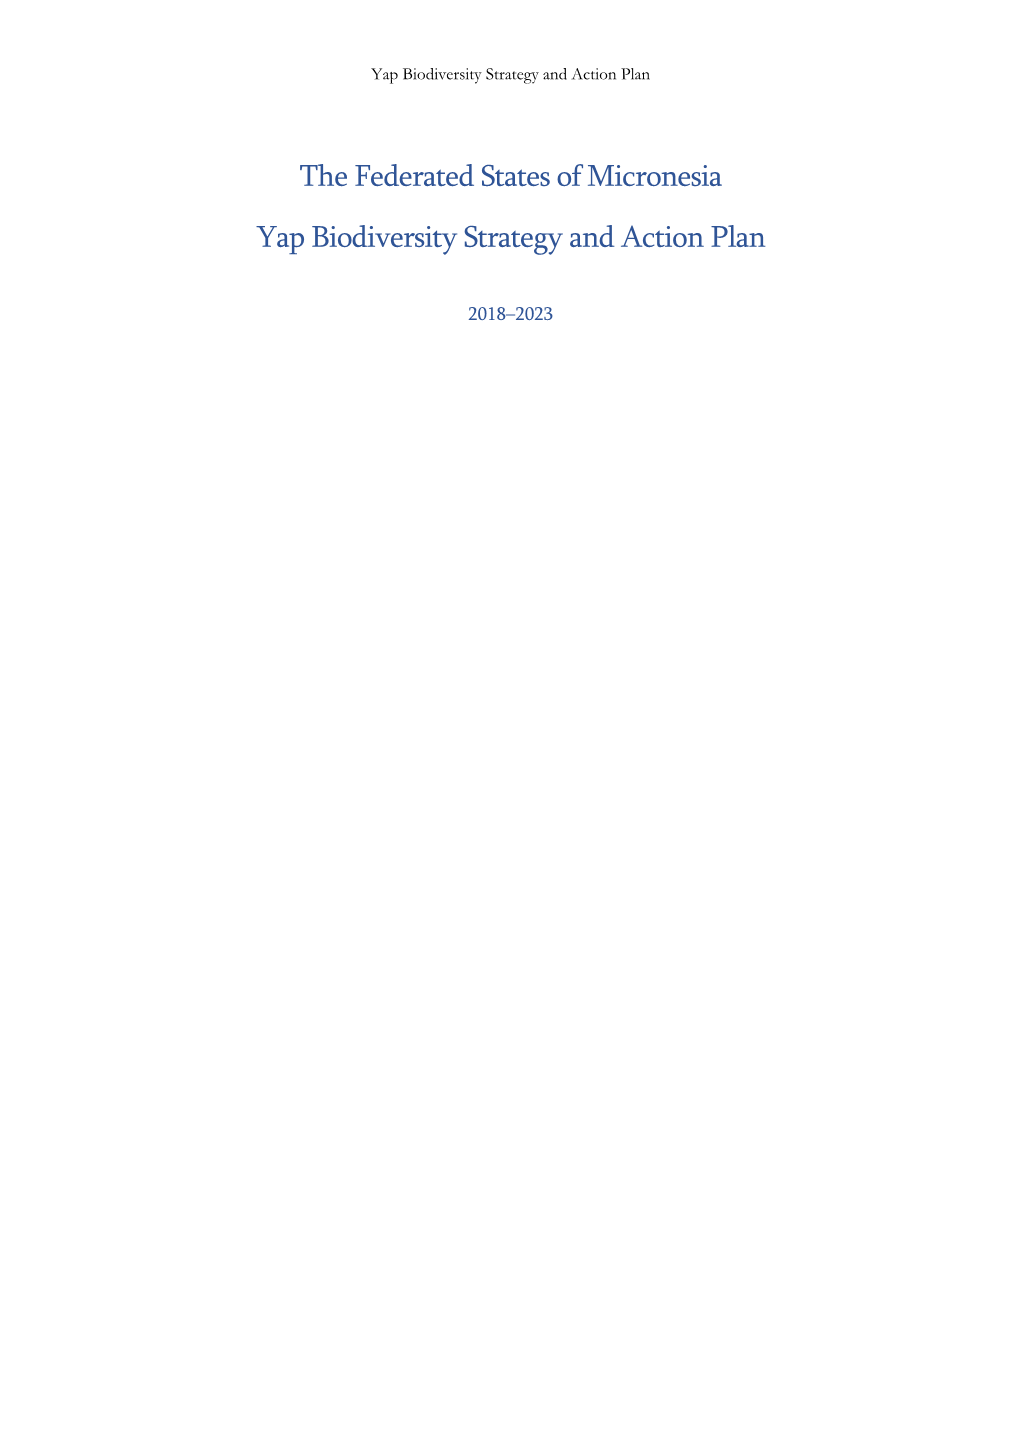 The Federated States of Micronesia Yap Biodiversity Strategy and Action Plan